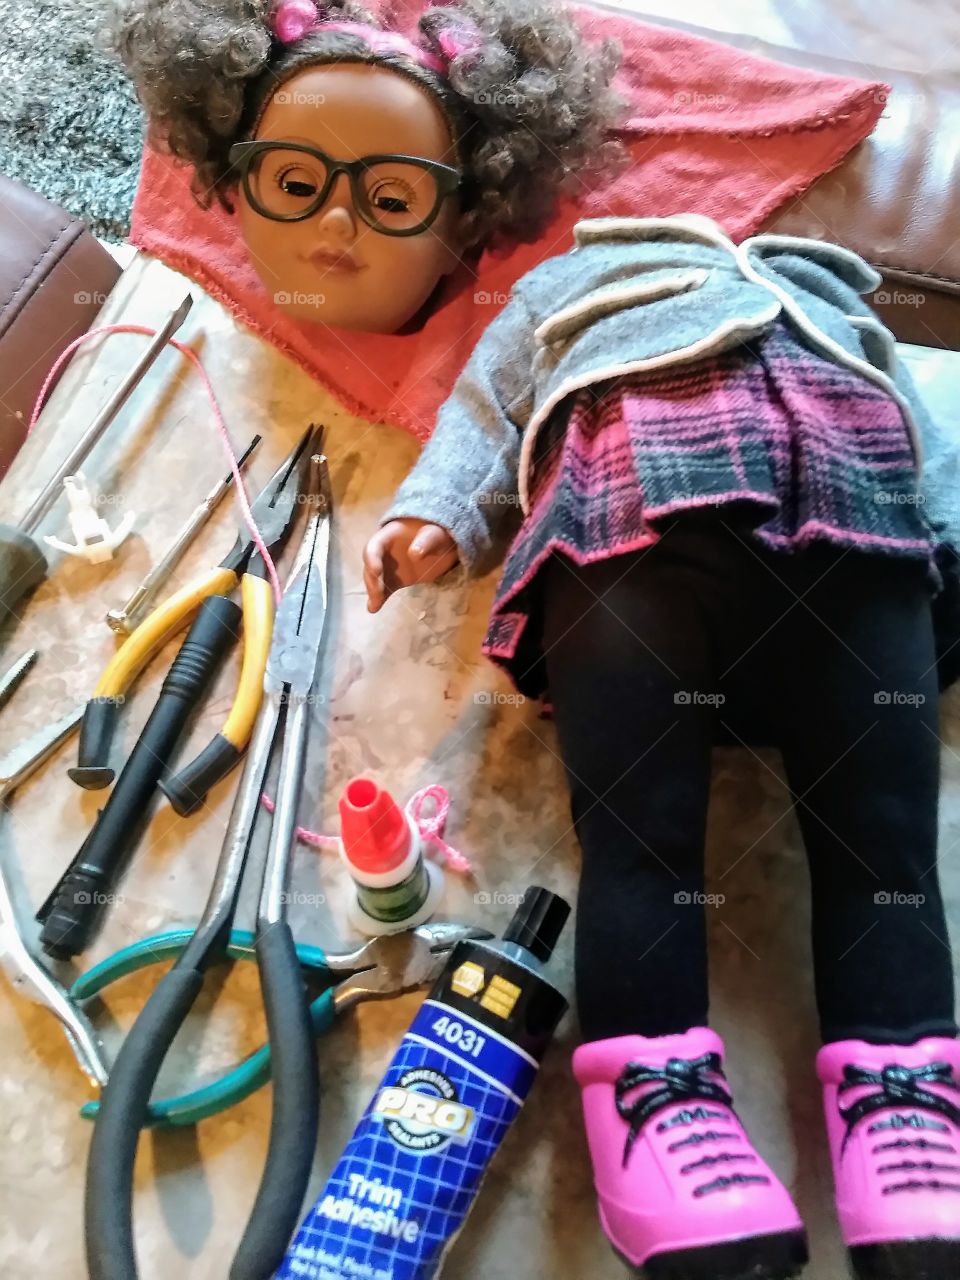 Trying to fix little girls favorite doll.